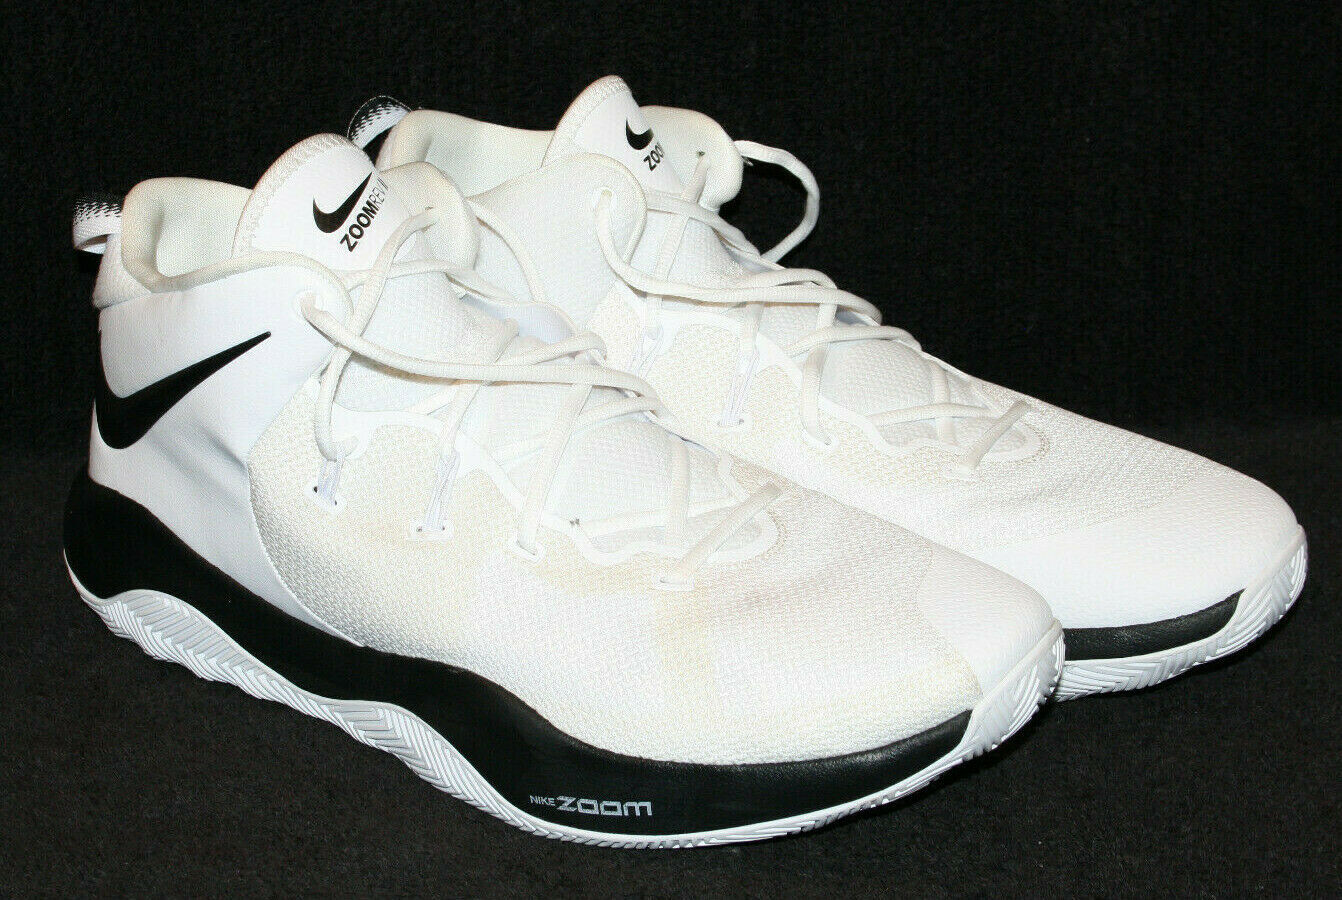 size 2 basketball shoes